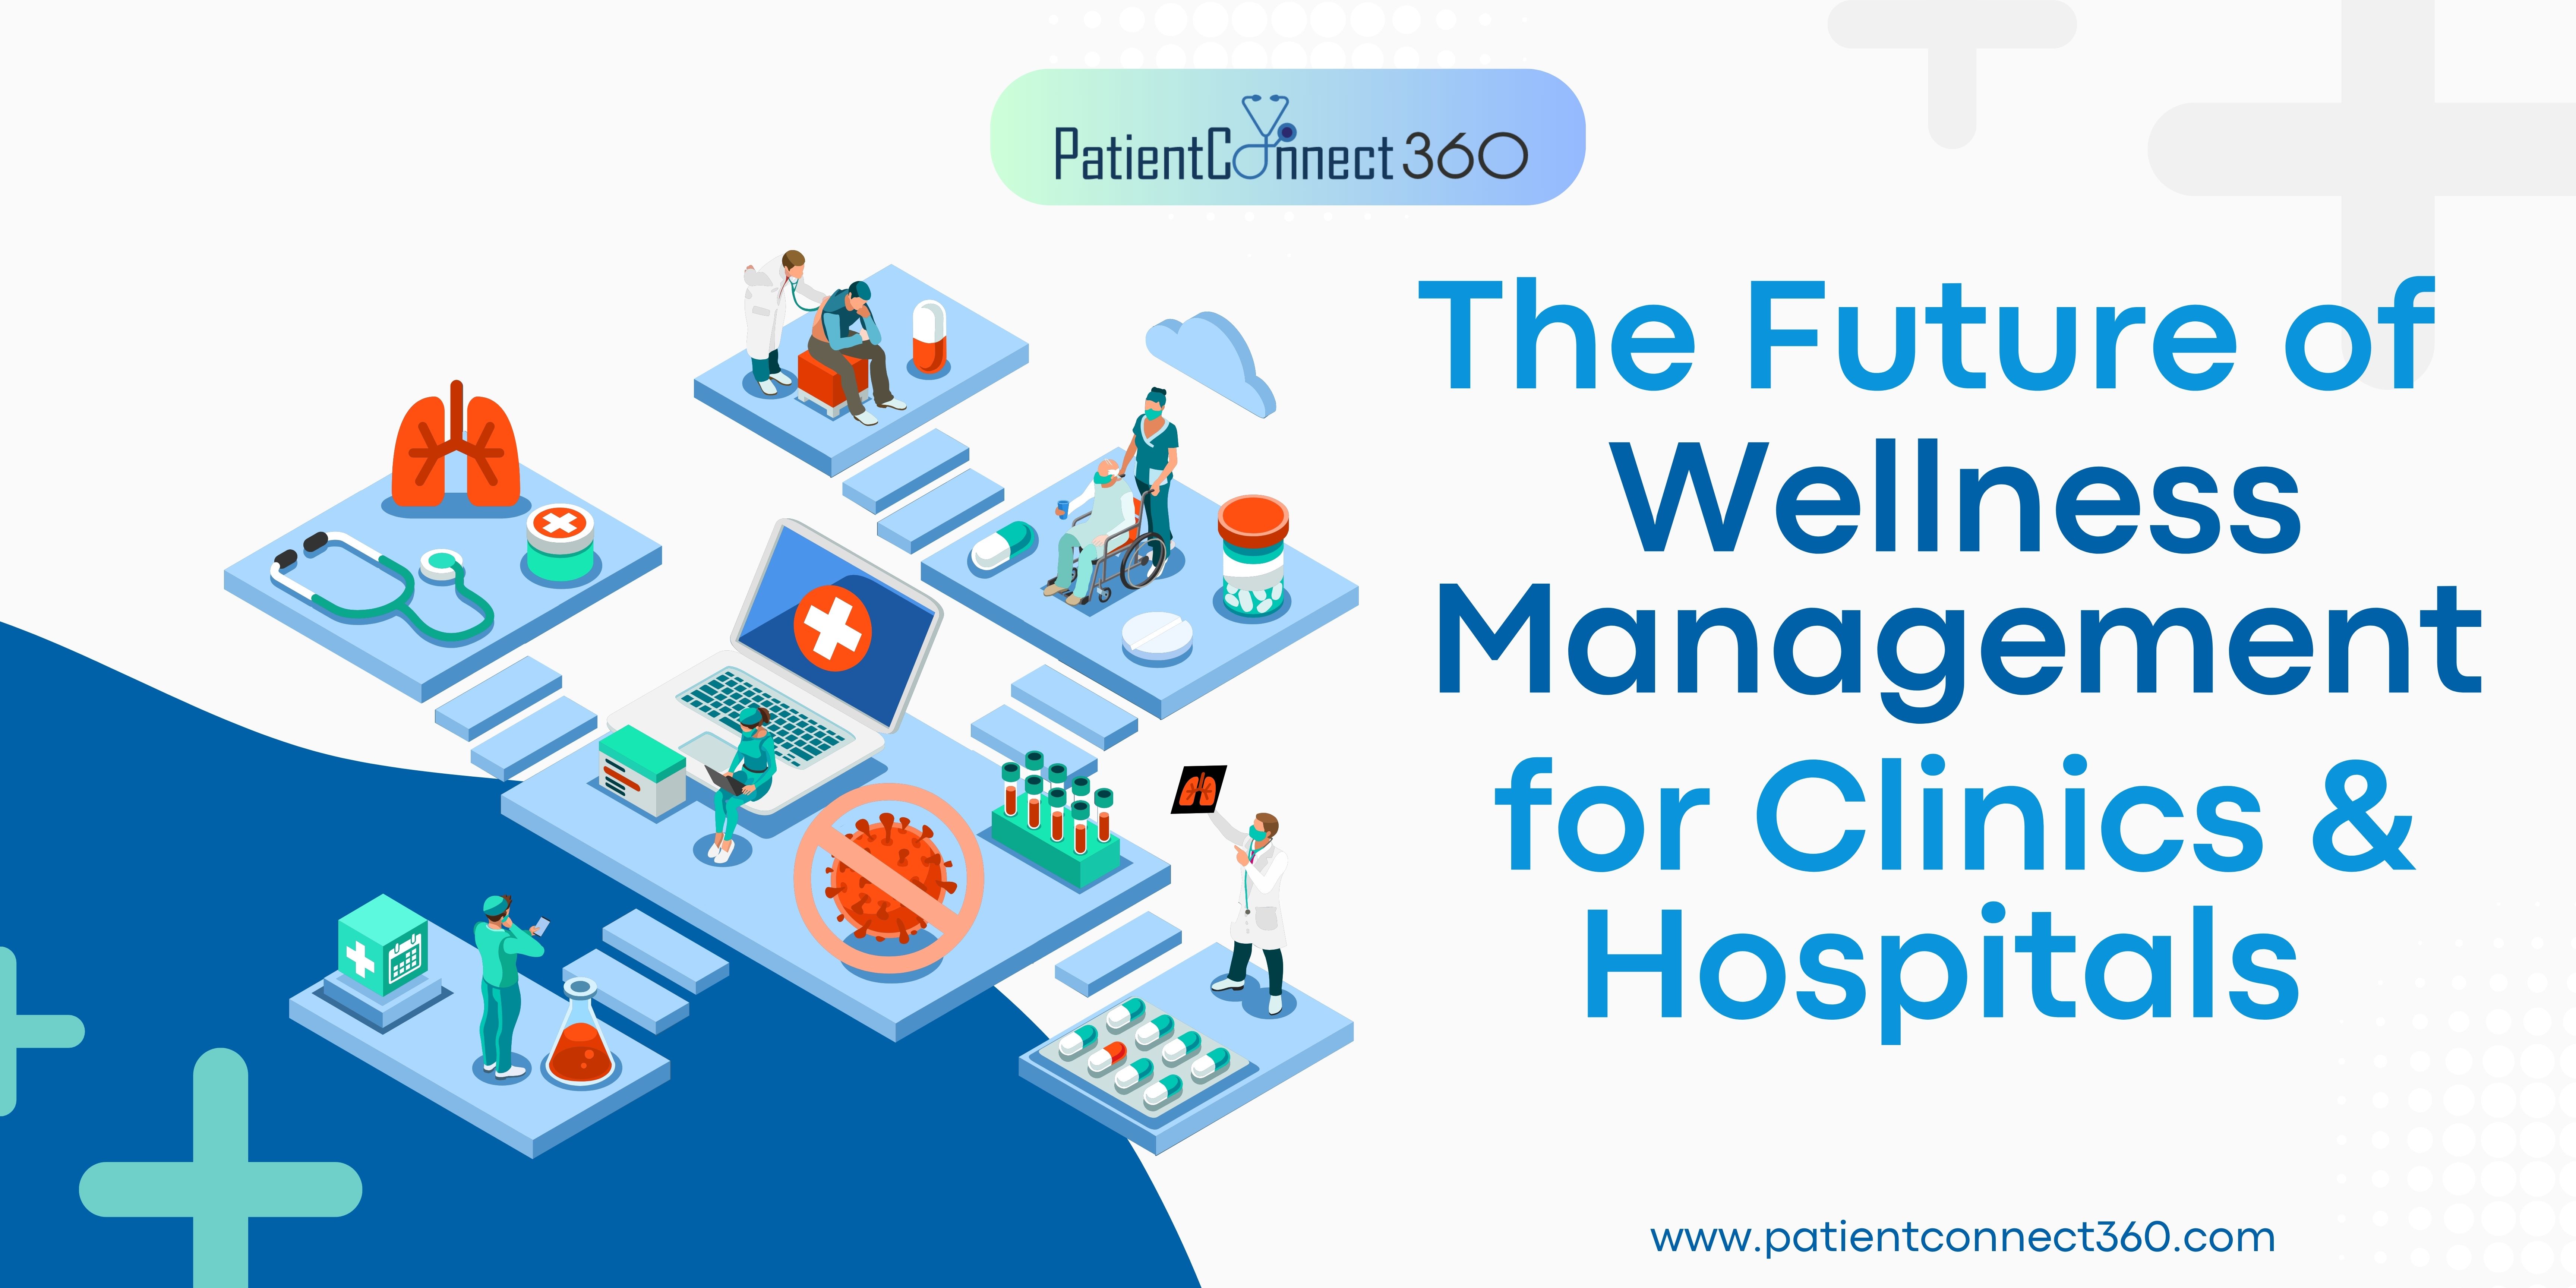 DatientCo Anect 360

The Future of
Wellness

for Clinics &
Hospitals

www.patientconnect360.com